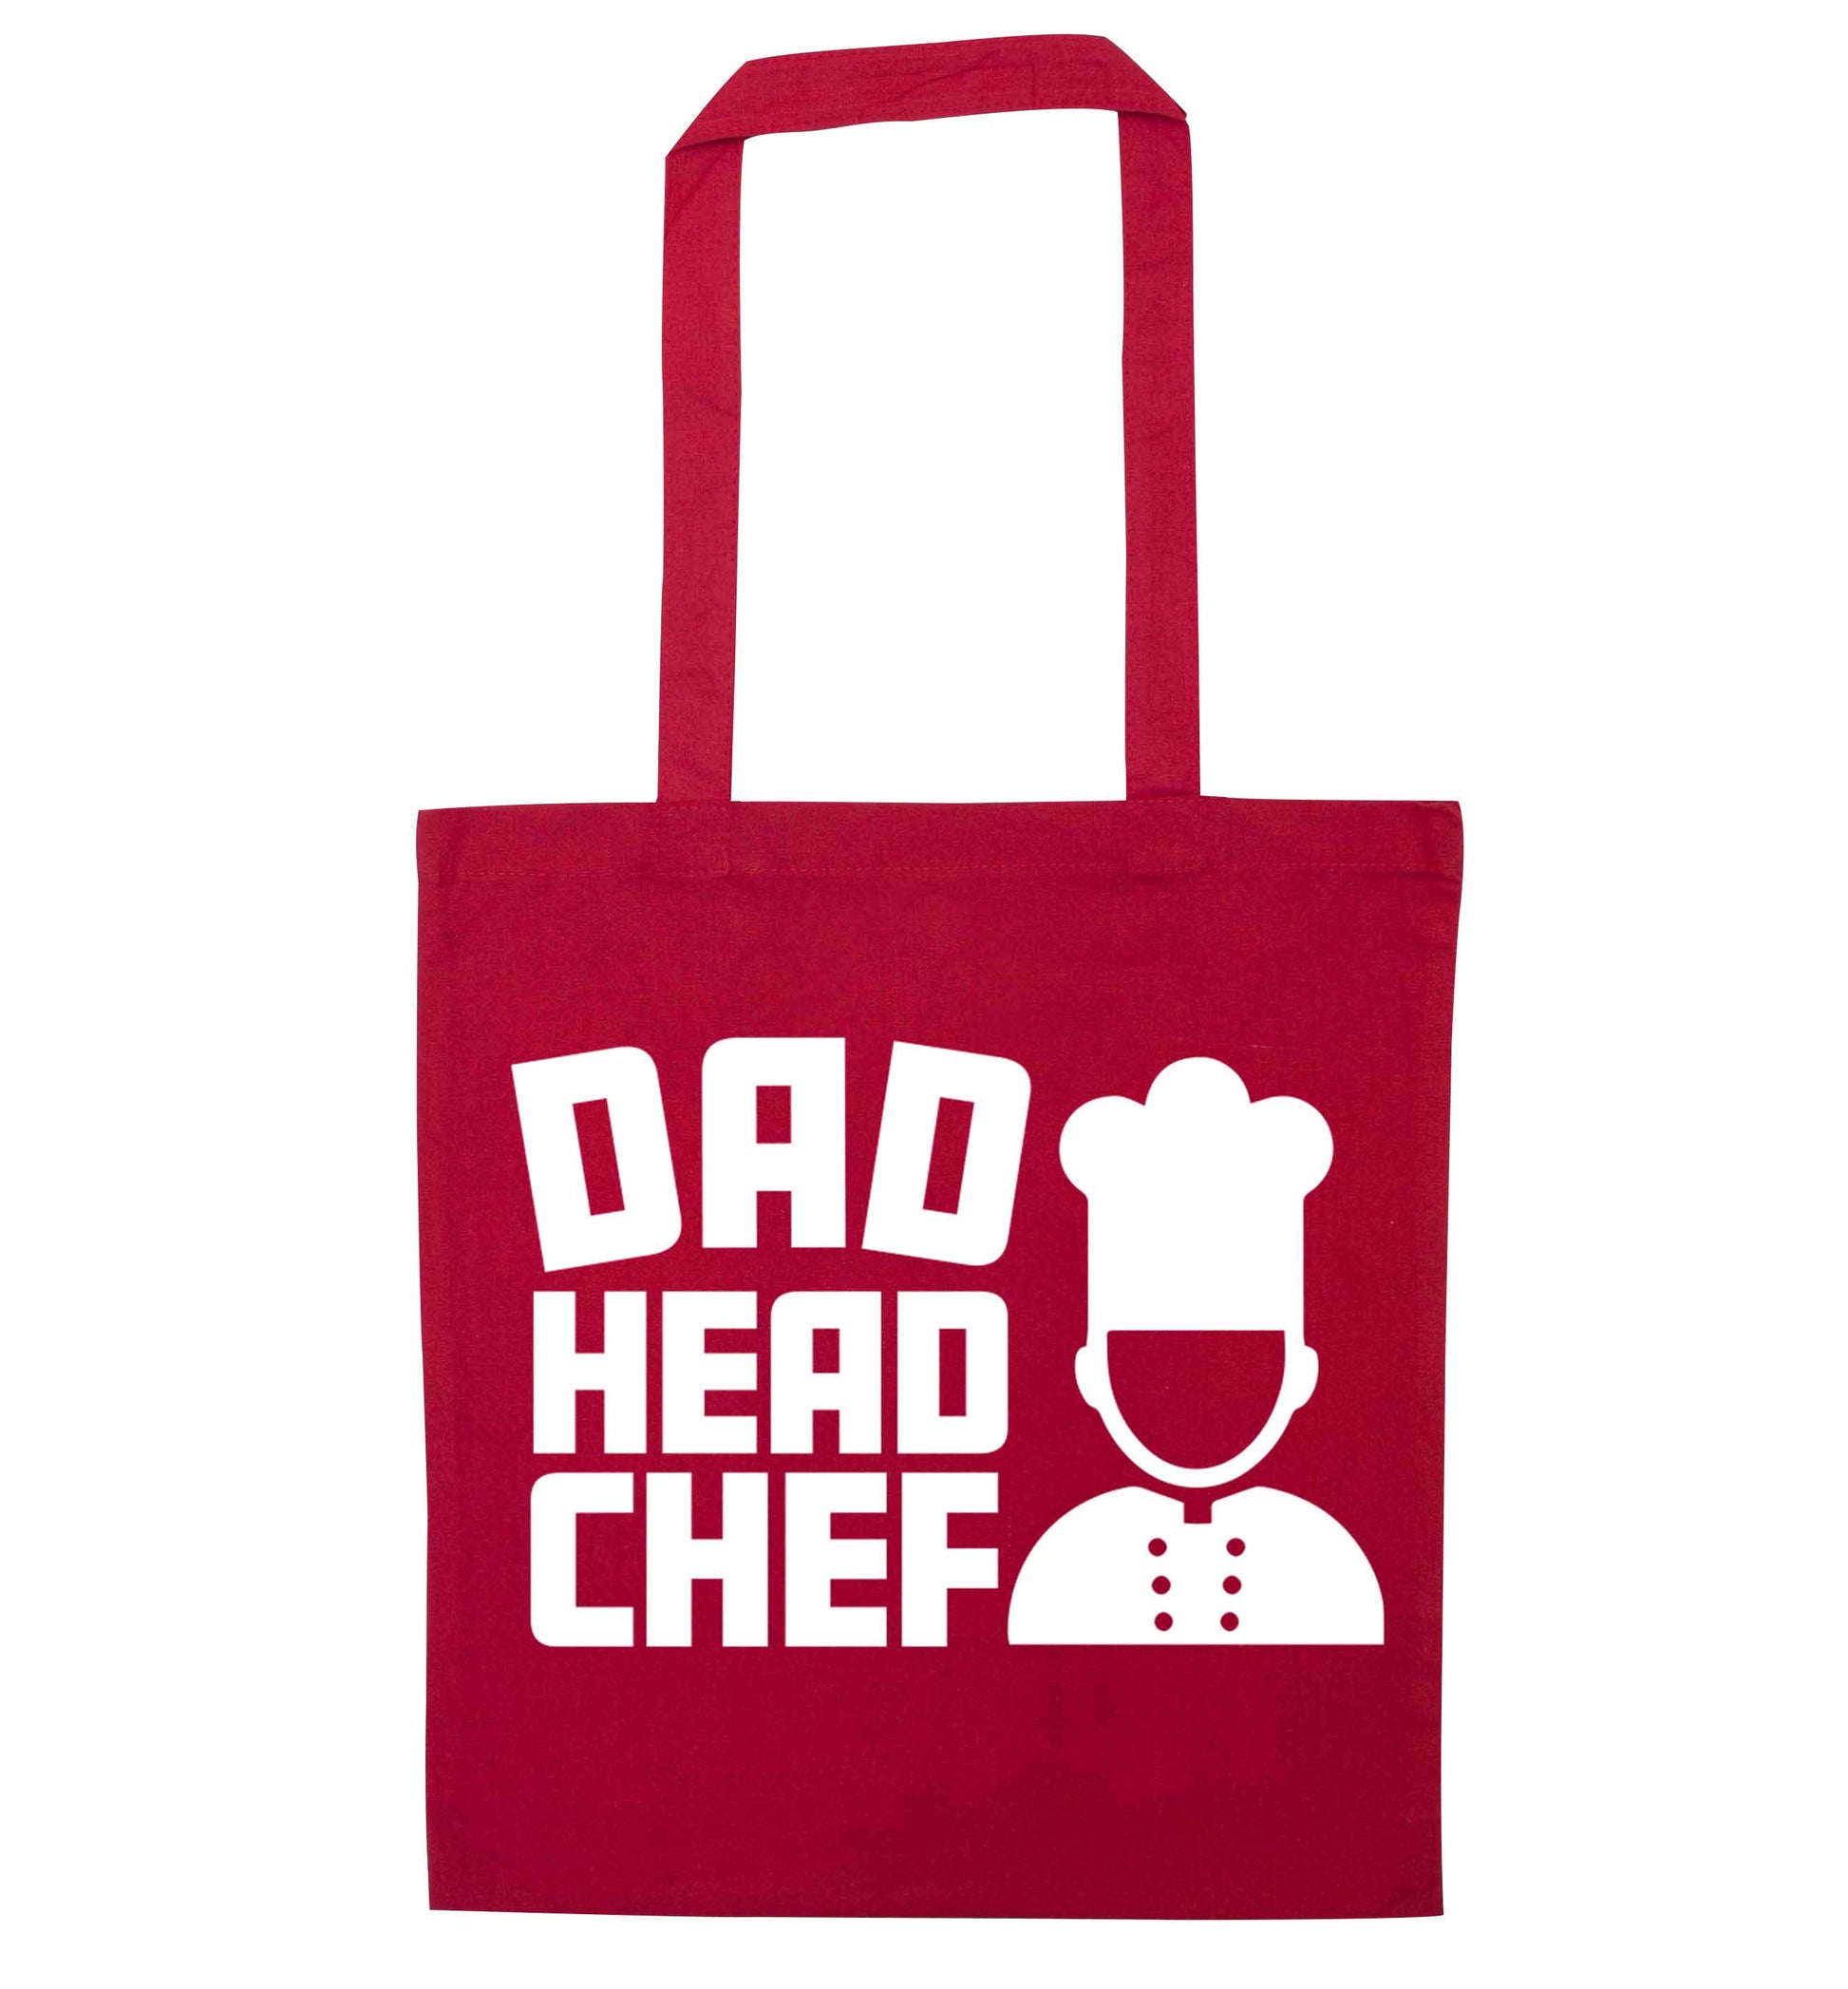 Dad head chef red tote bag